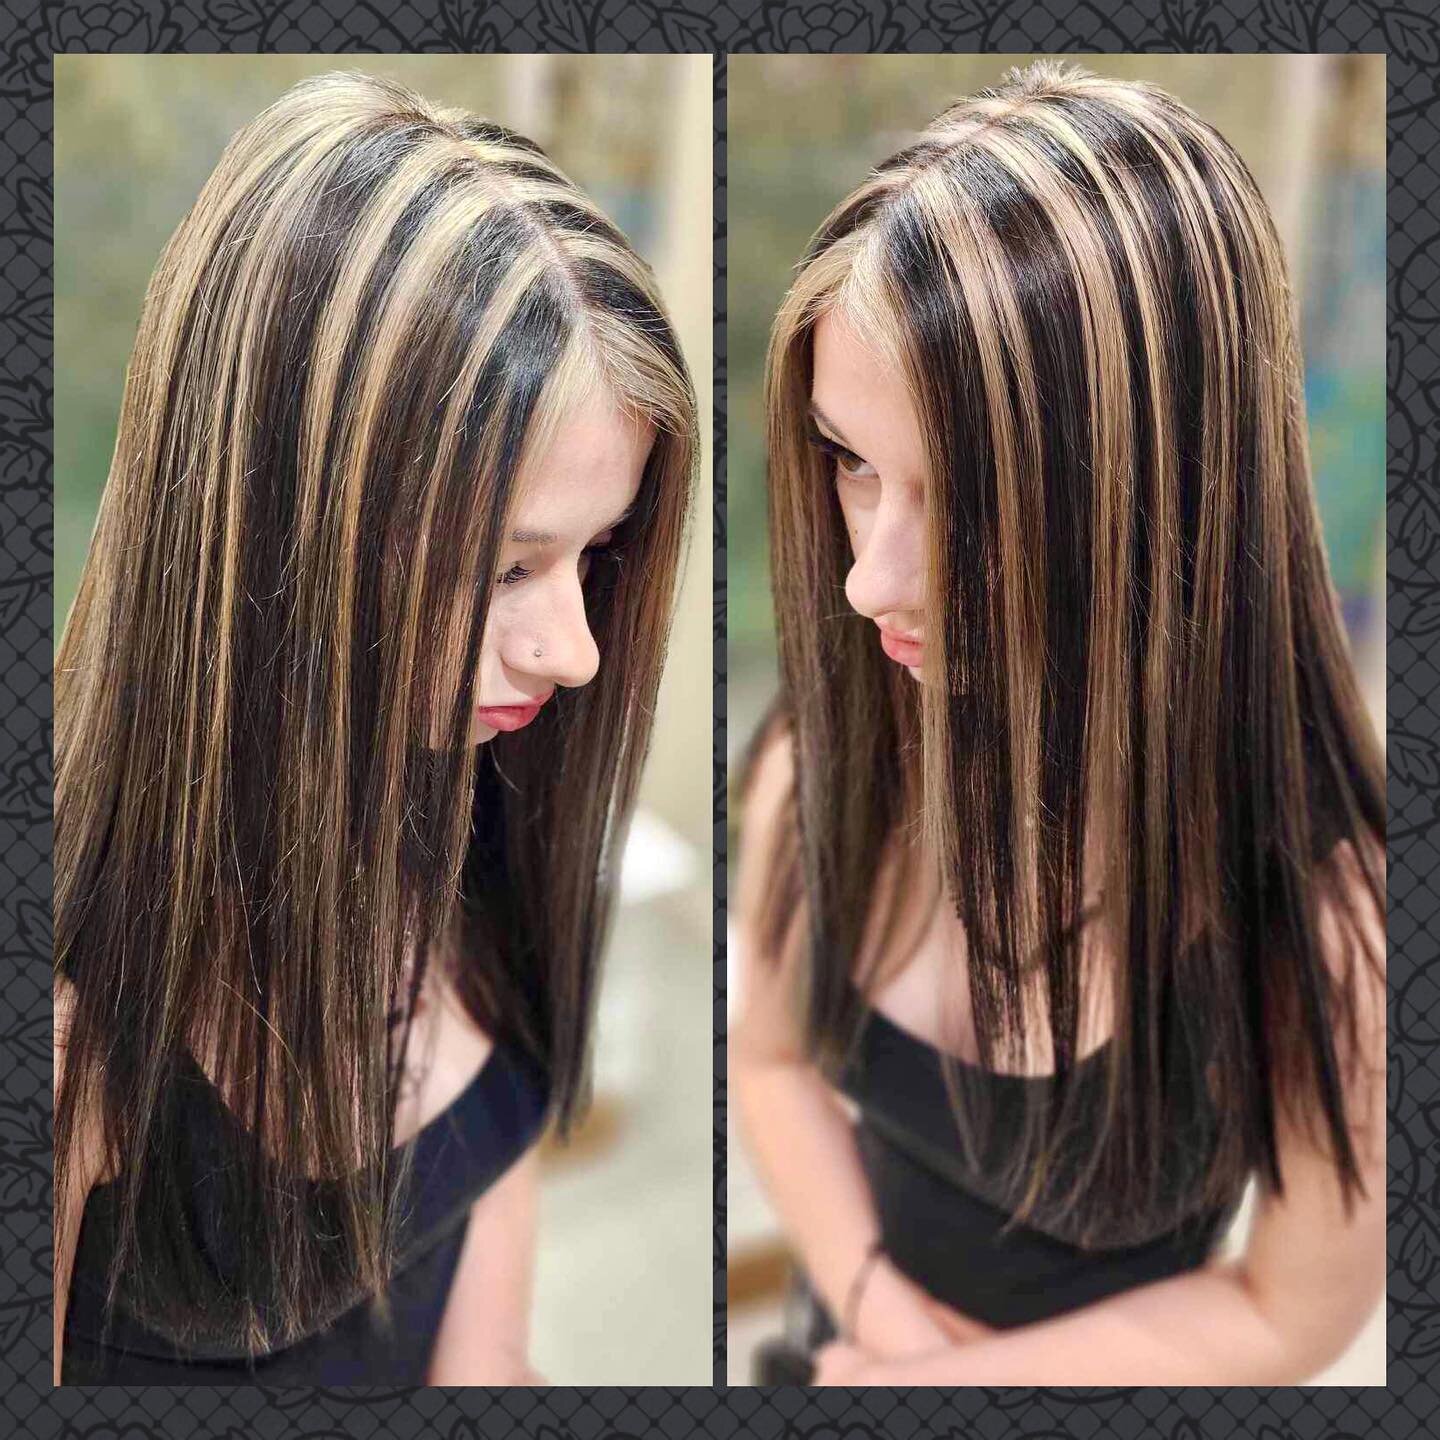 🚨Transformation Tuesday!!! 🚨Michelle&rsquo;s client wanted a GIANT change and 4 hours later Amelia got the 🦓 hair of her dreams!!! 😻 Michelle did a mix of highlights and low lights to achieve this custom block color pattern. She finished with a g